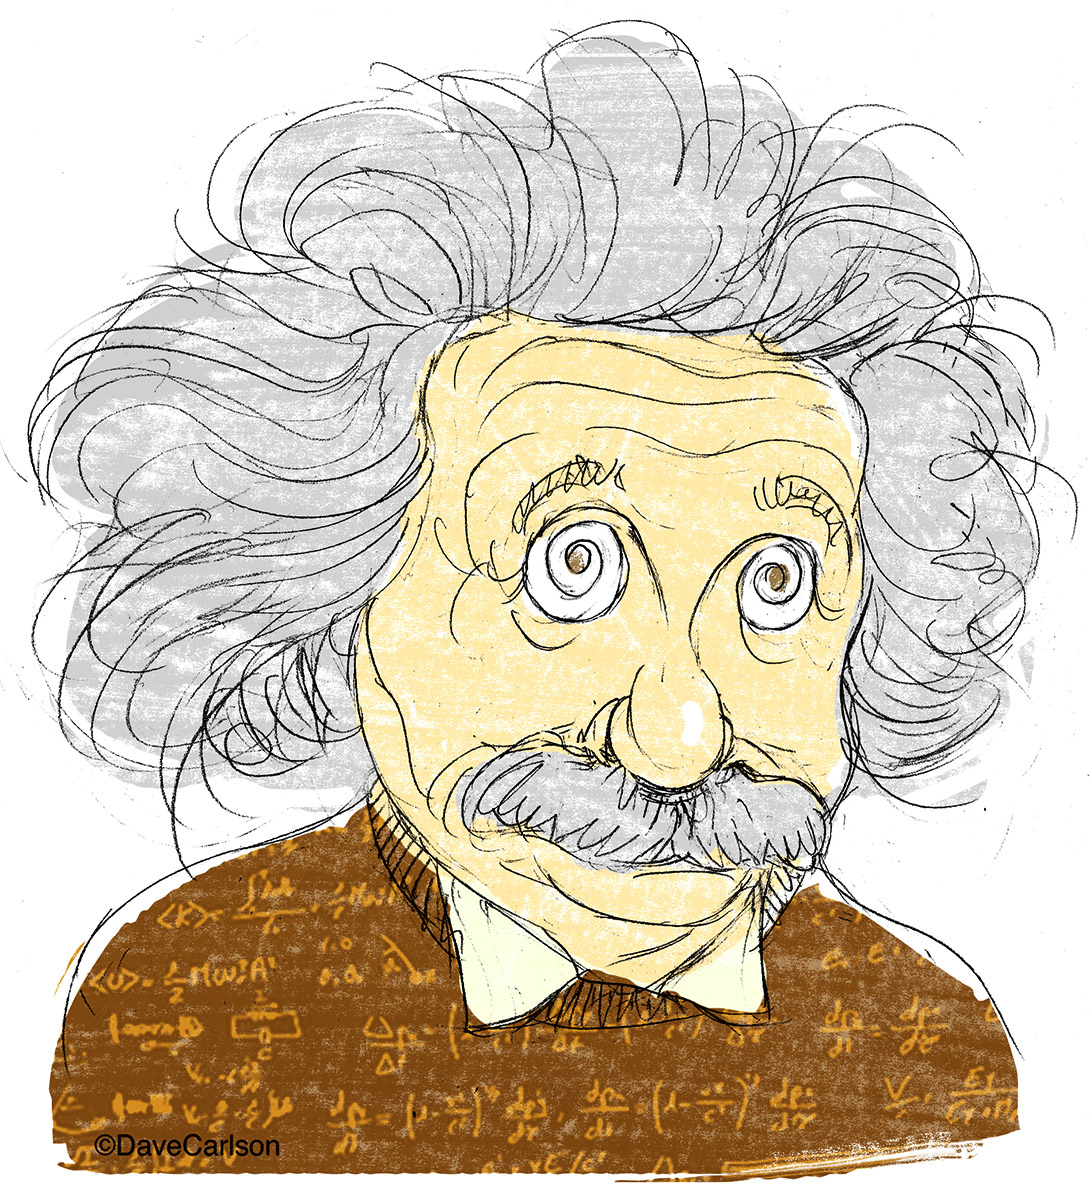 Caricature of famed physicist Albert Einstein, author of the General Theory of Relativity.